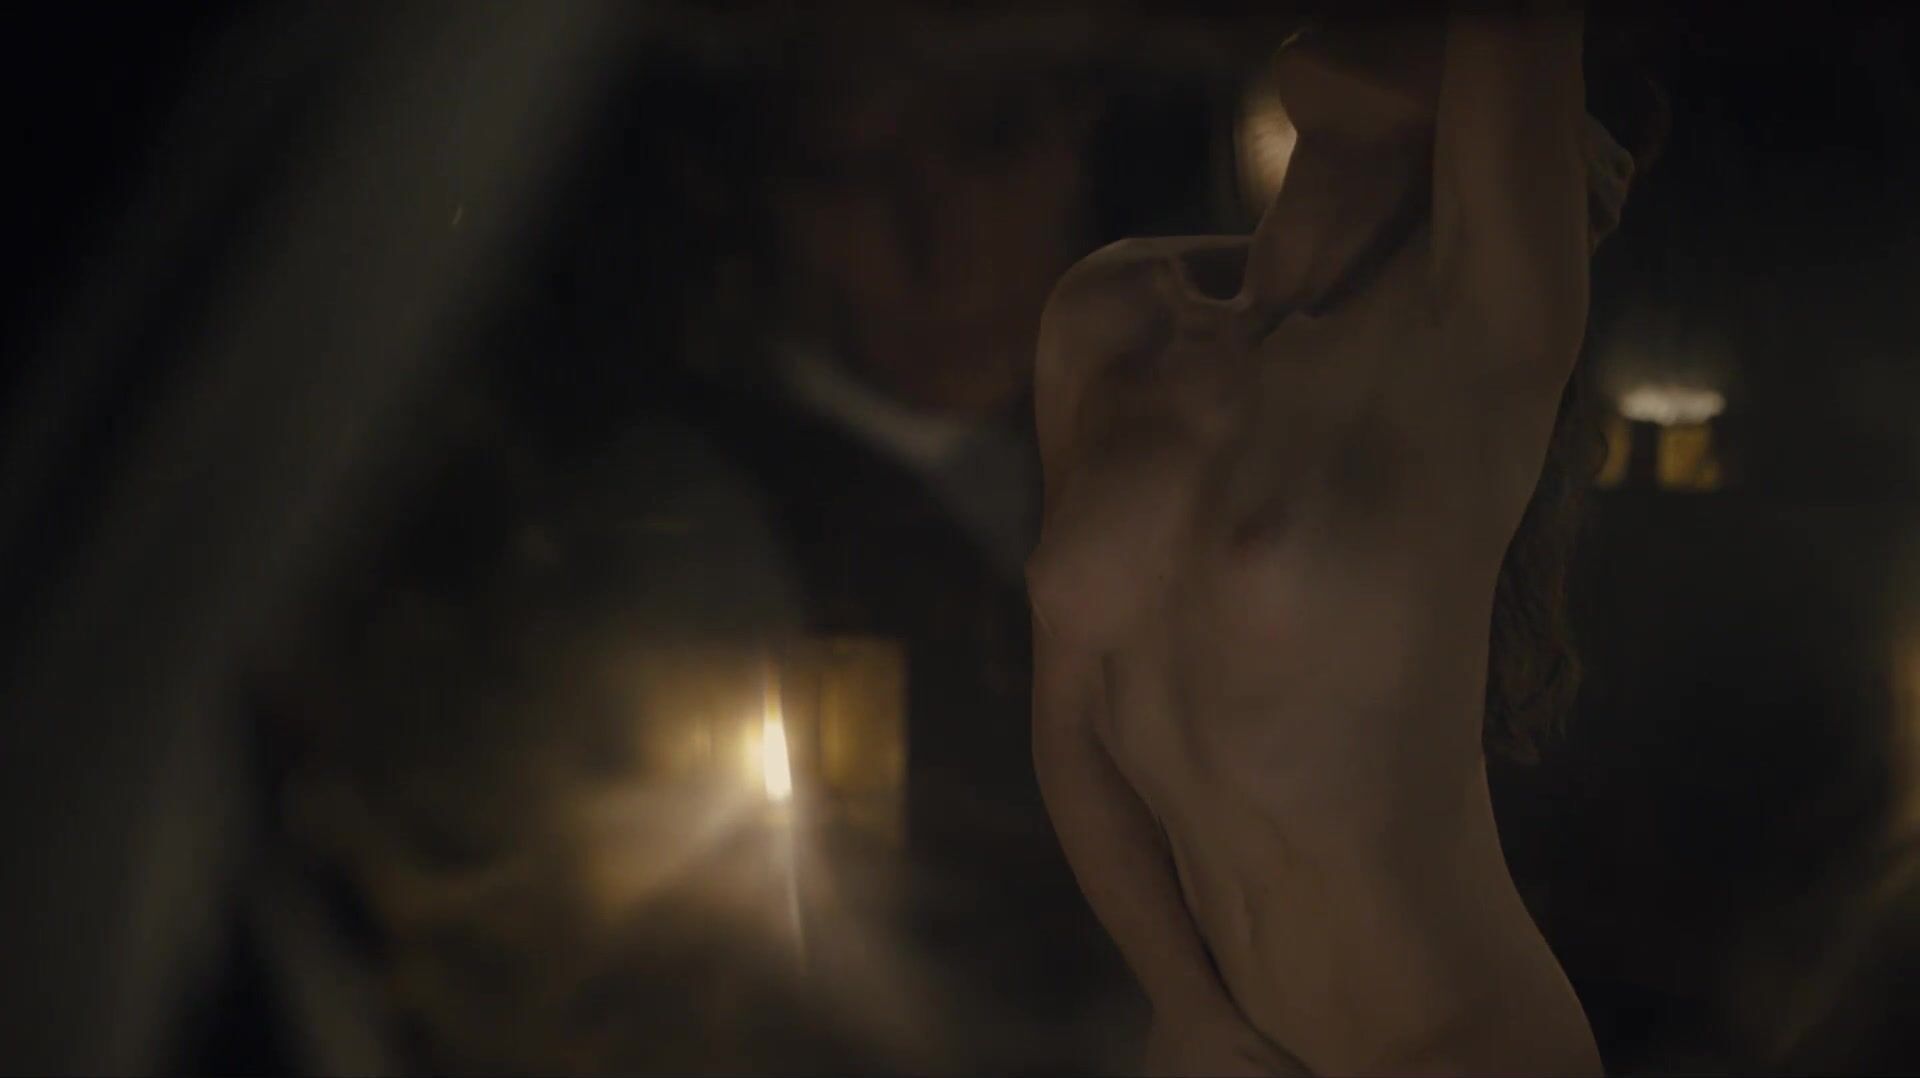 MelonsTube Director focuses on Sonya Cullingford's nice boobies showing them in The Danish Girl Sexpo - 1